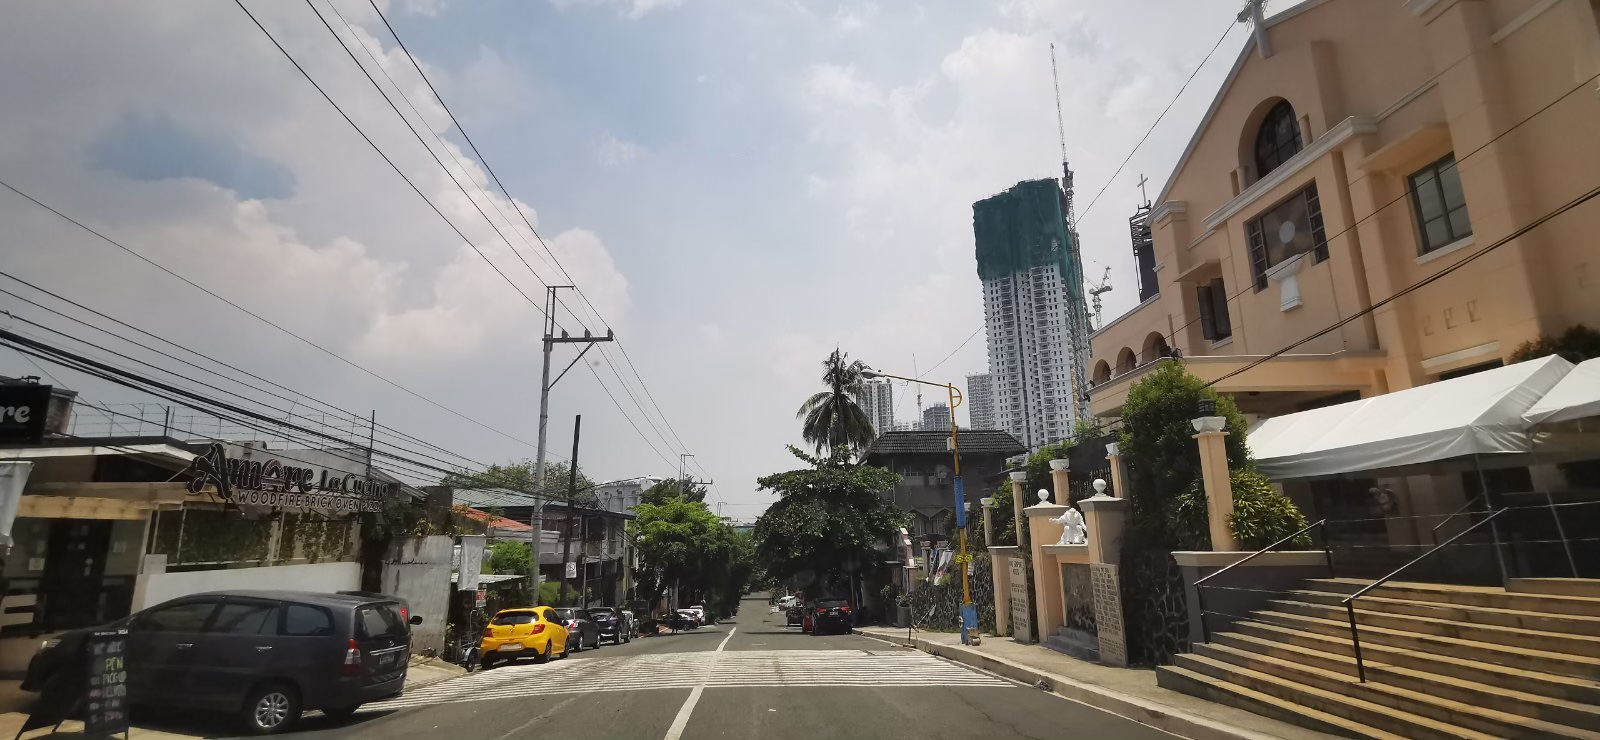 West Capitol Drive, Kapitolyo, Pasig for Sale, Best Offer